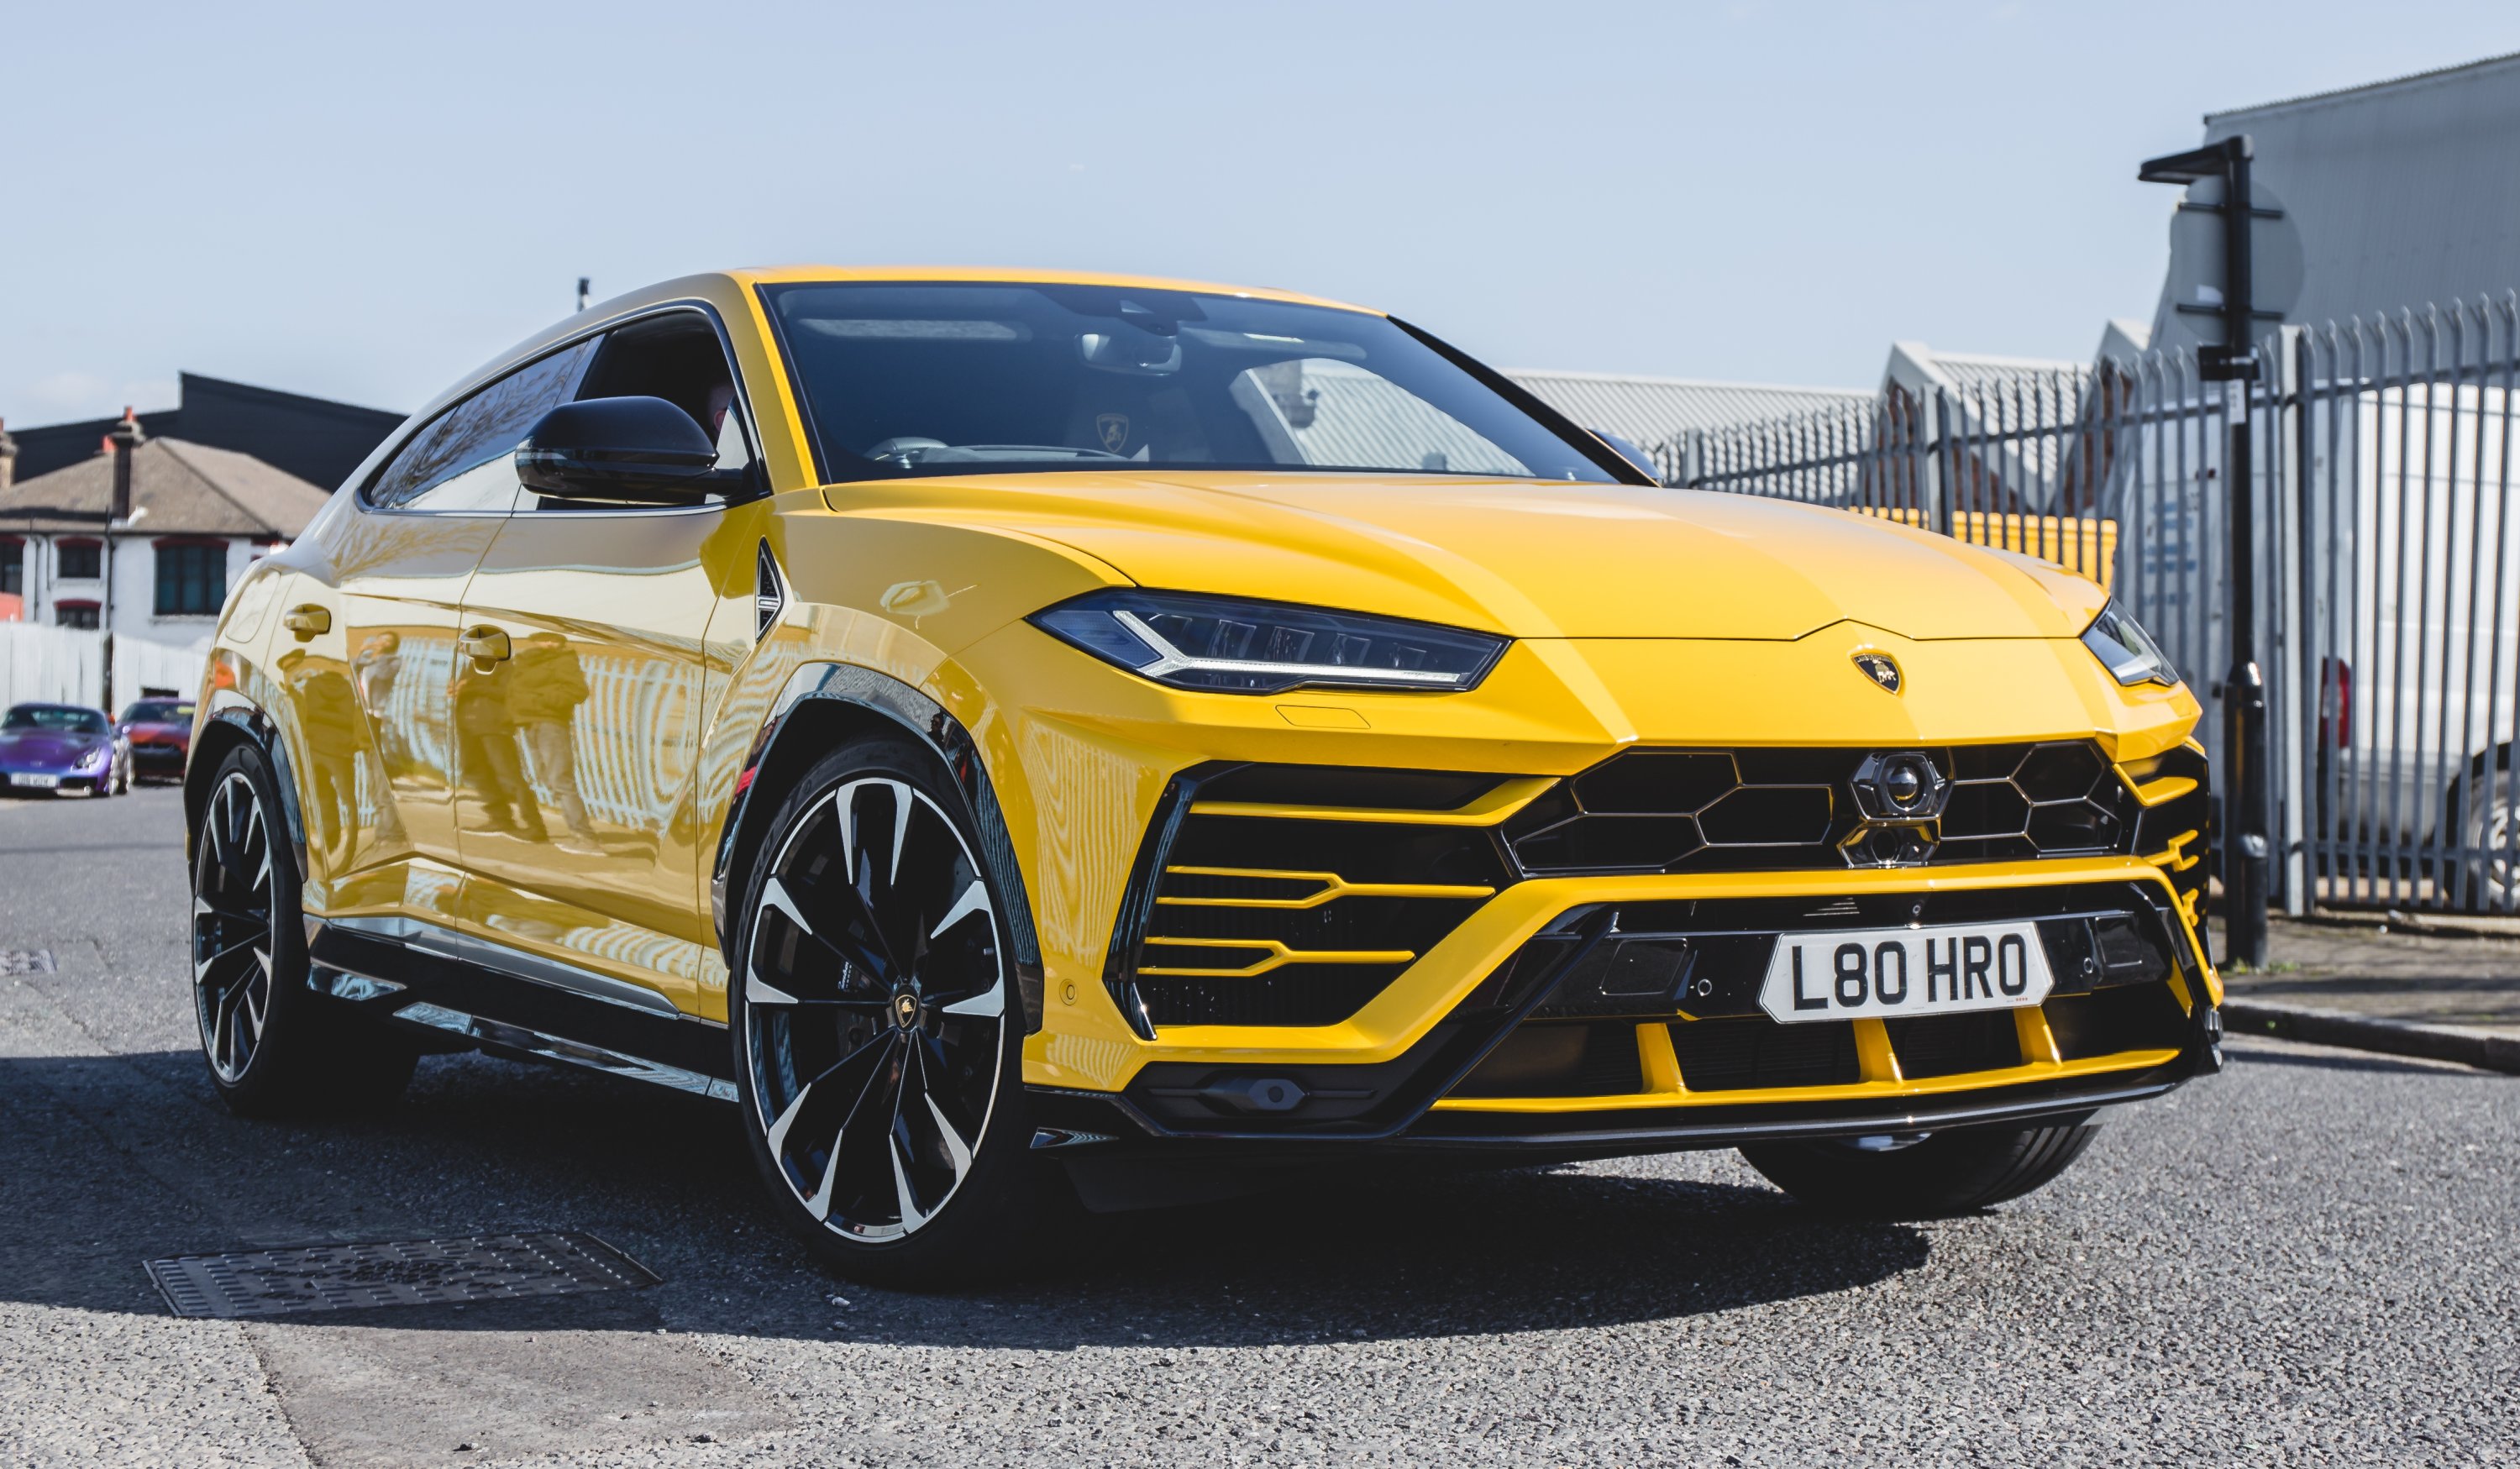 The Lamborghini Urus is displayed at "Supercar Sunday," hosted by HR Owen in Acton, London, March 24, 2019. (Getty Images)